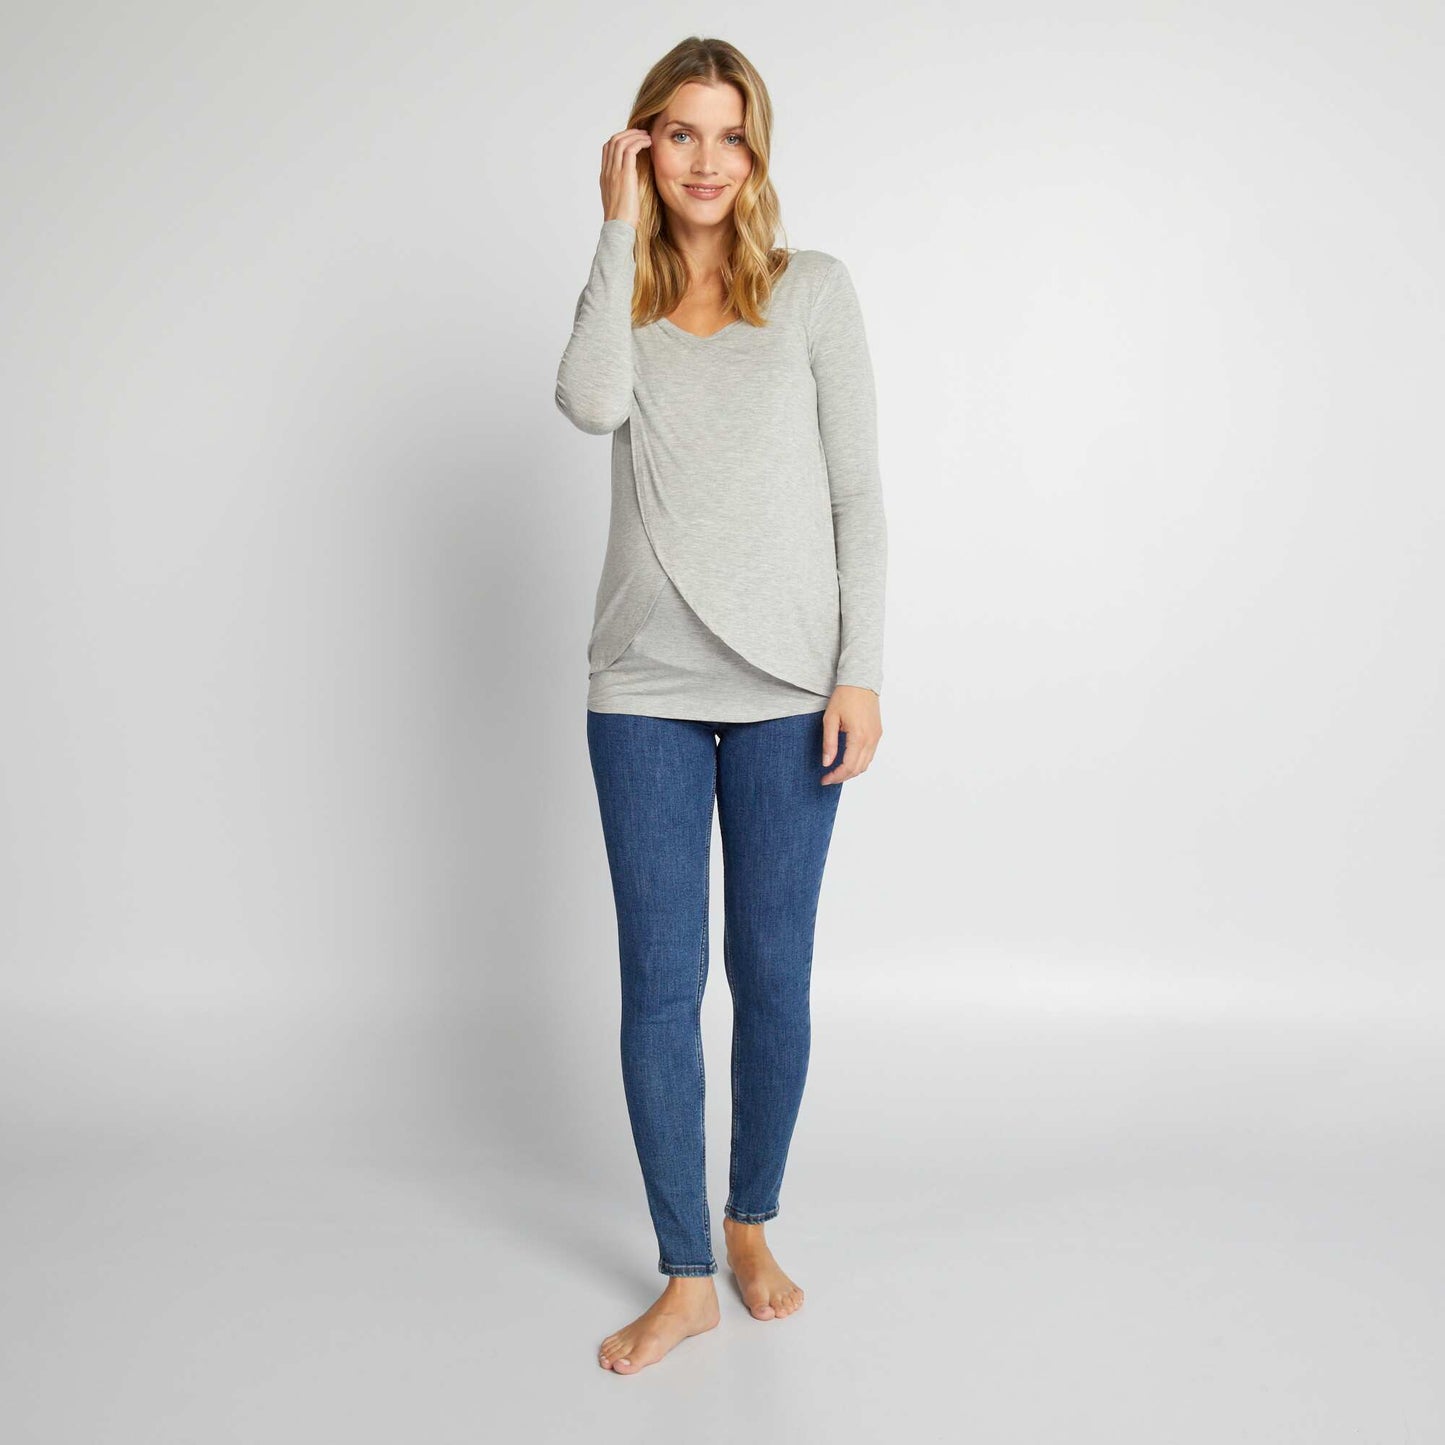 Super stretchy maternity jeans BLUE